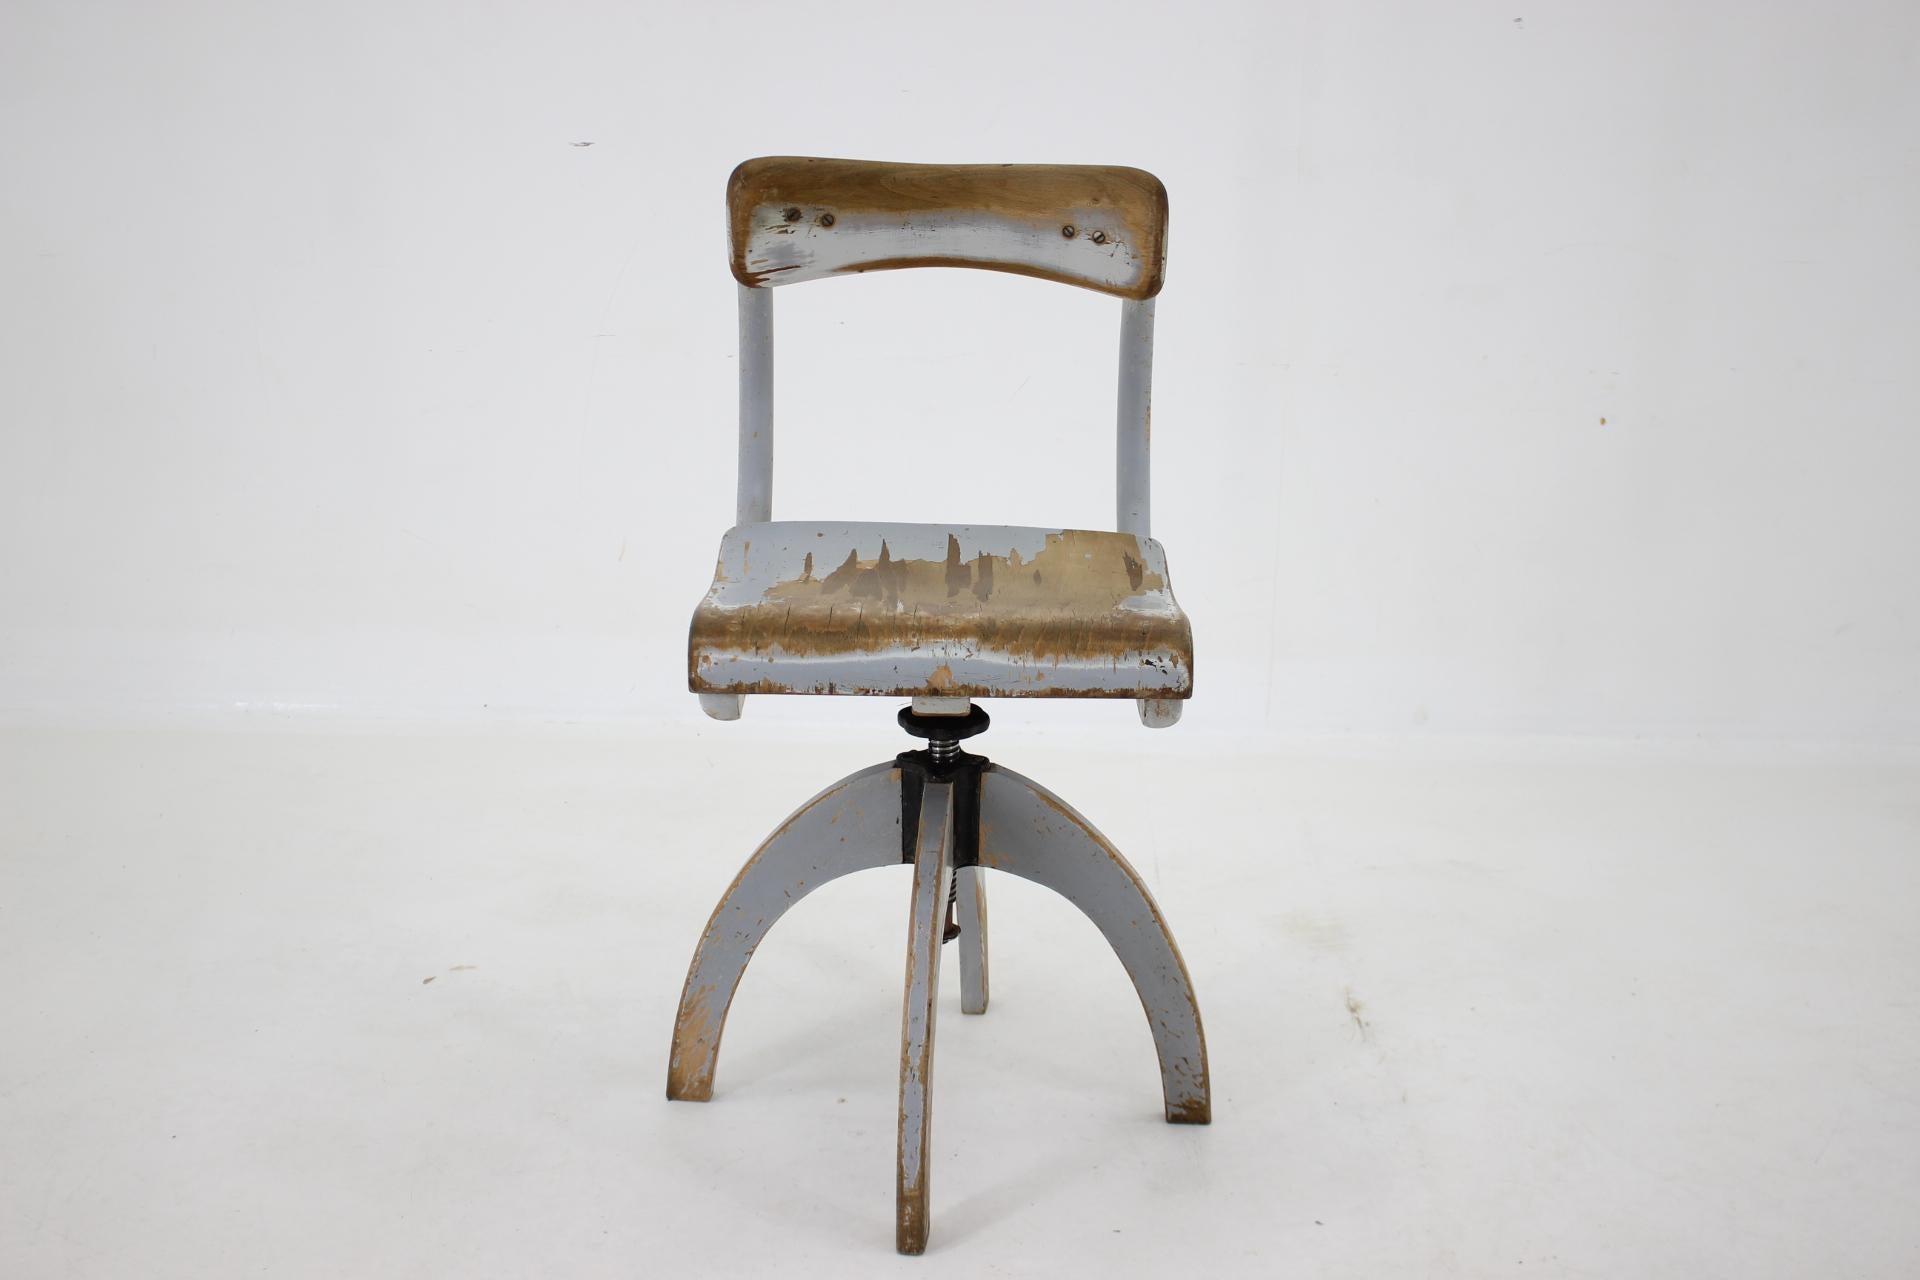 - Good original condition with patinated original color 
- sturdy and stable 
- Labeled 
- Adjustable height from 83cm to 93cm 